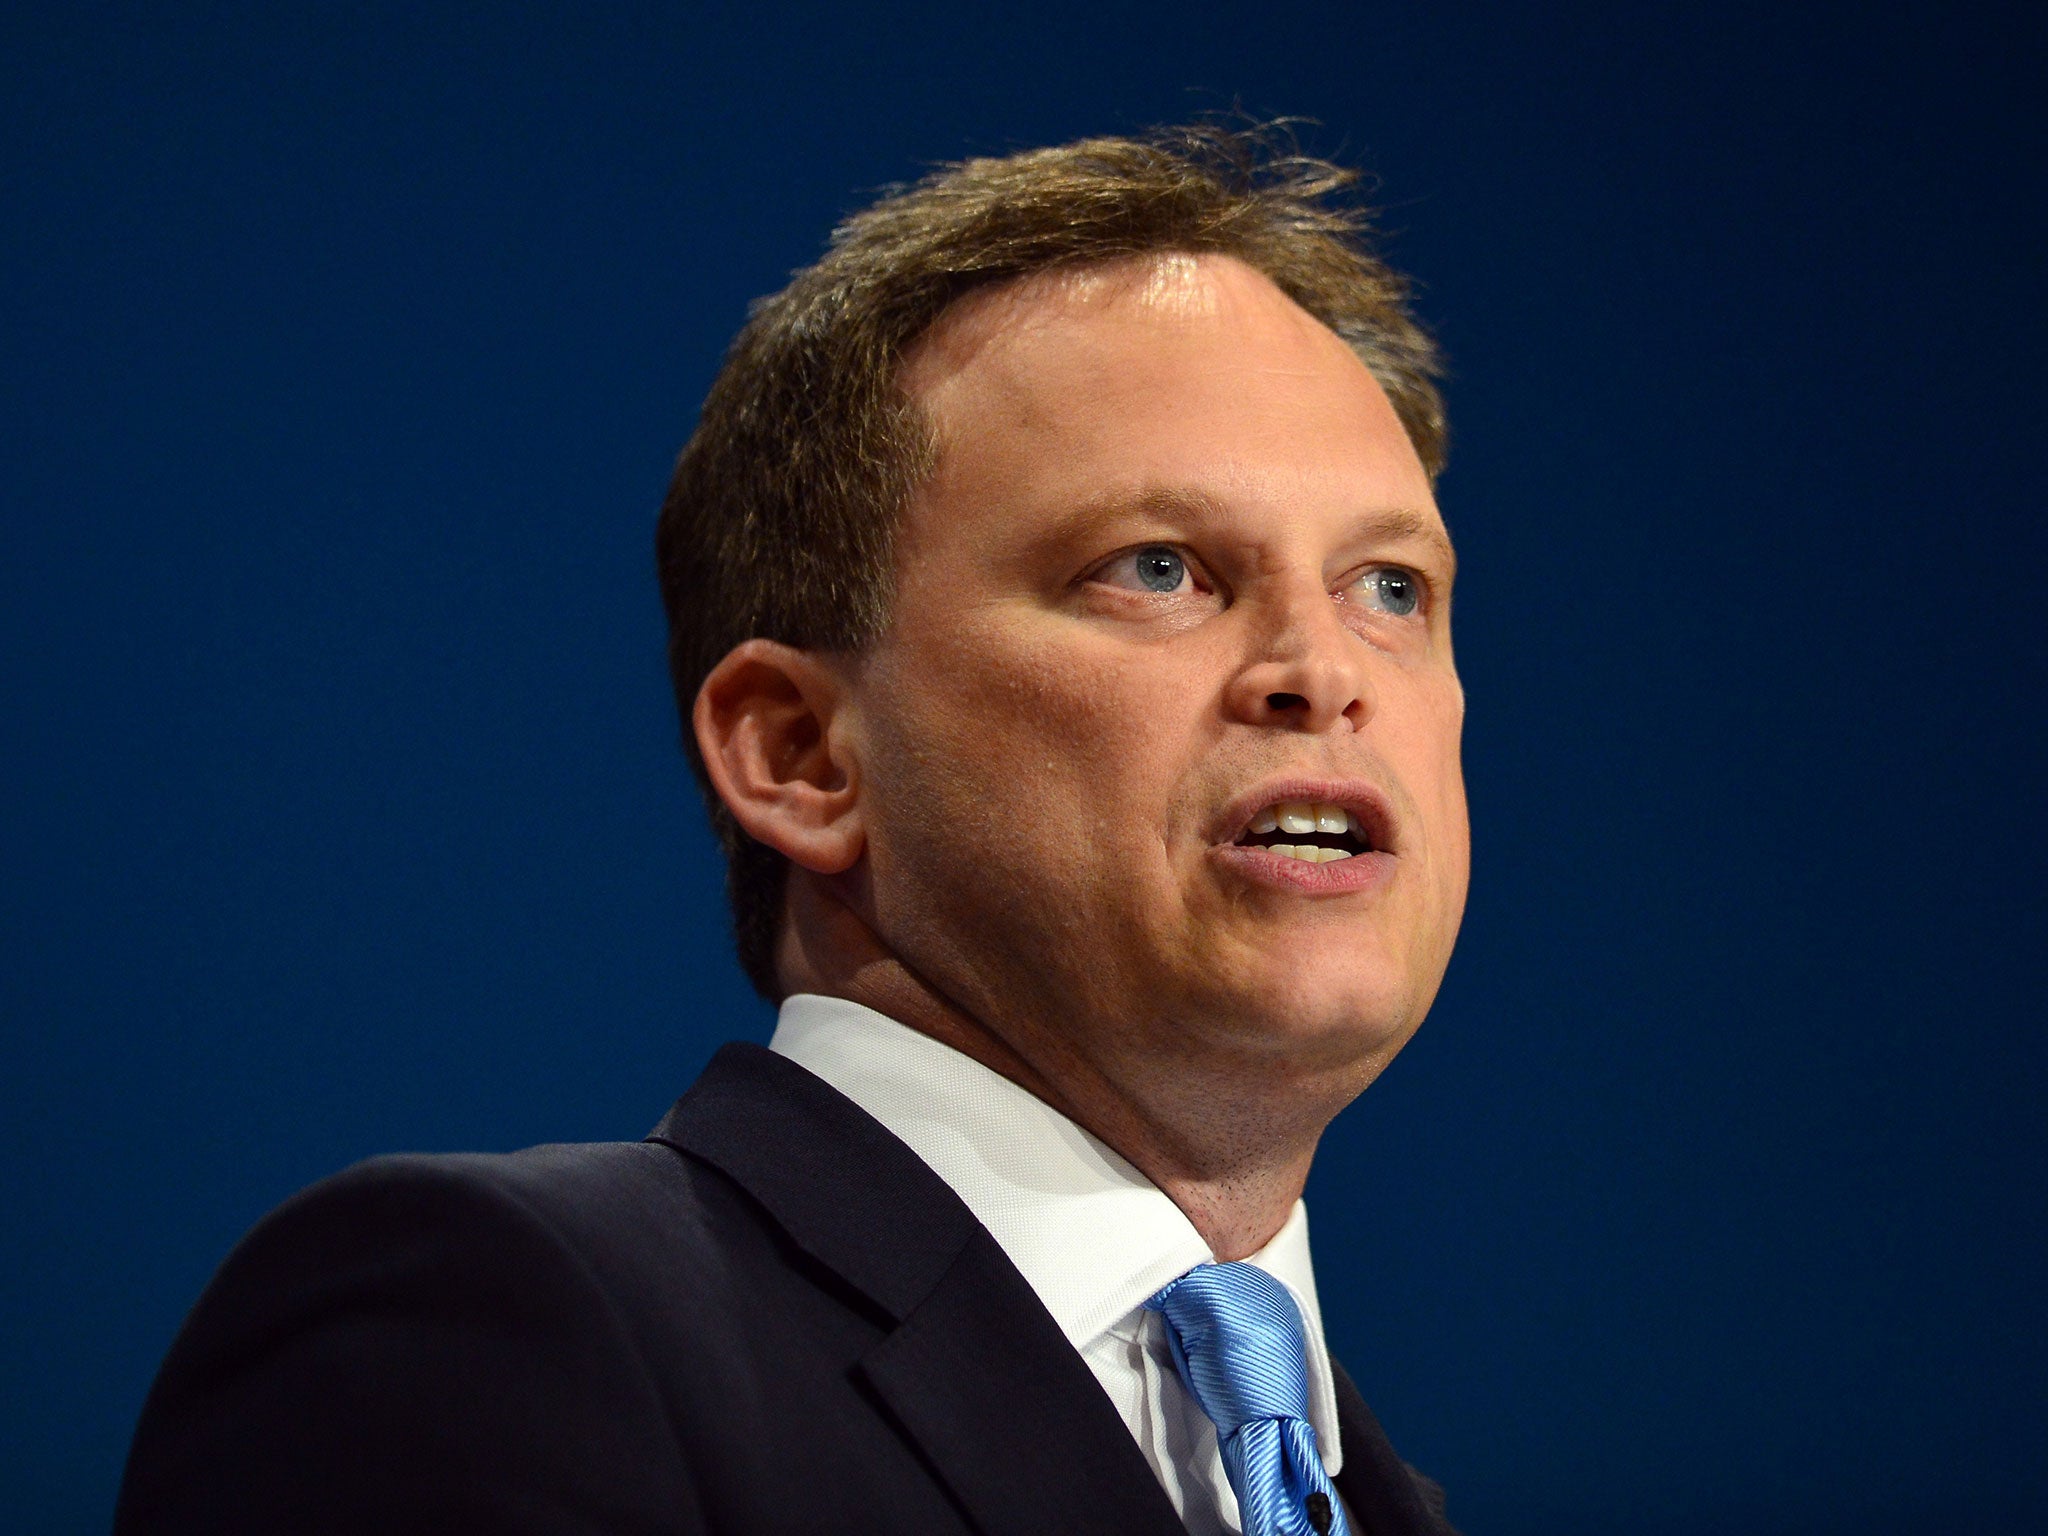 The Tory chairman Grant Shapps moved to suspend Mr Amin after an emergency meeting on Saturday night (Getty)